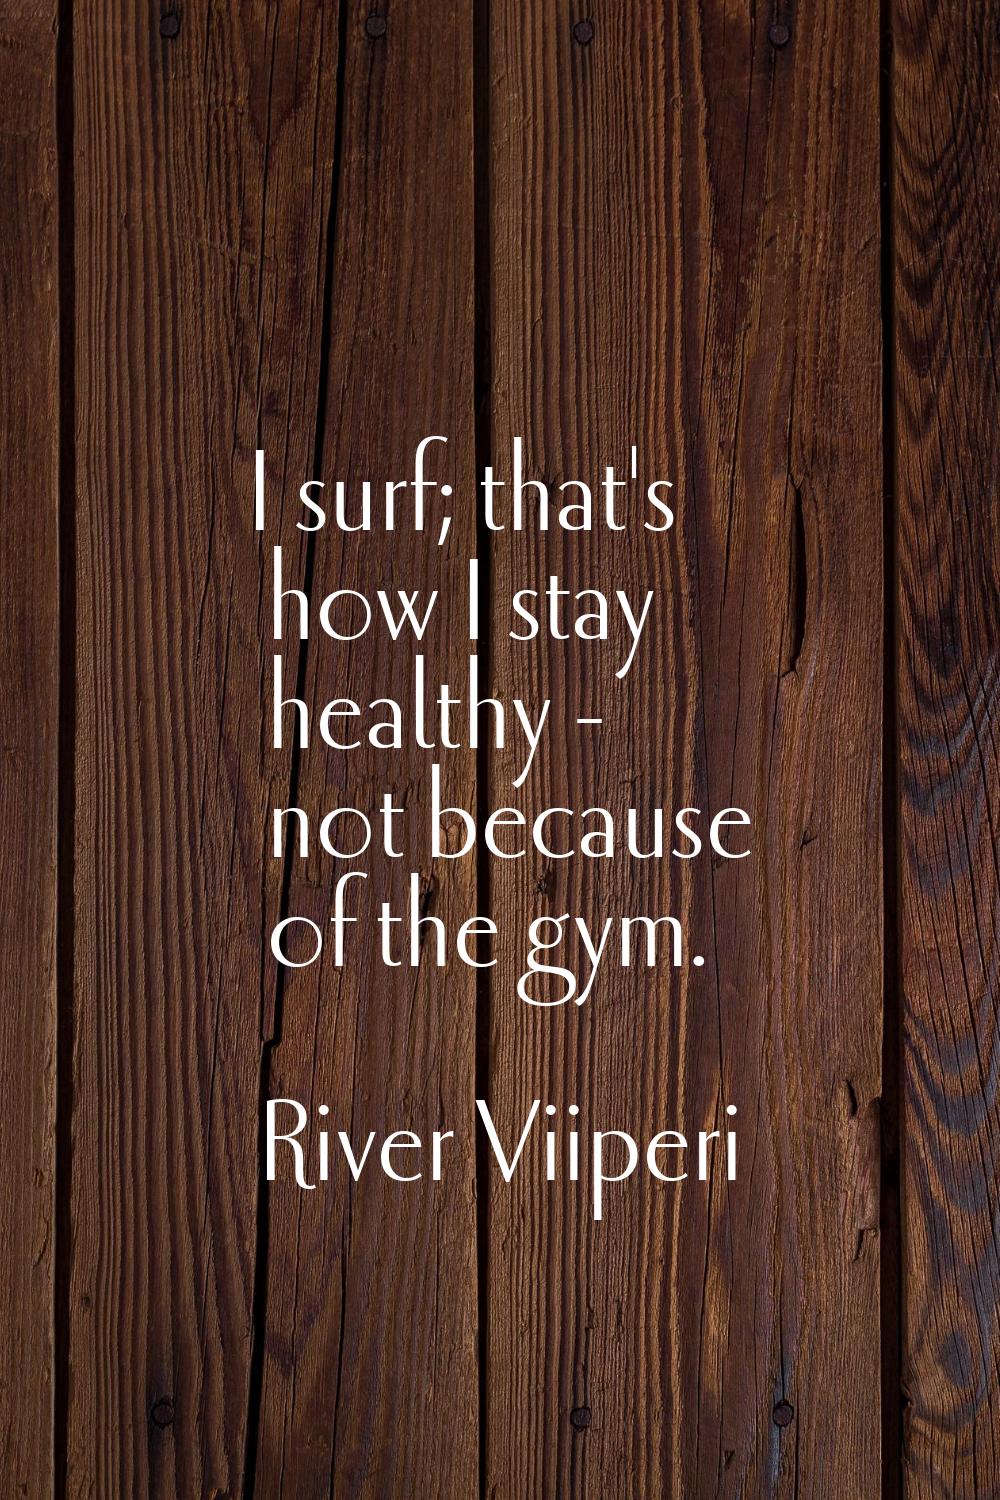 I surf; that's how I stay healthy - not because of the gym.